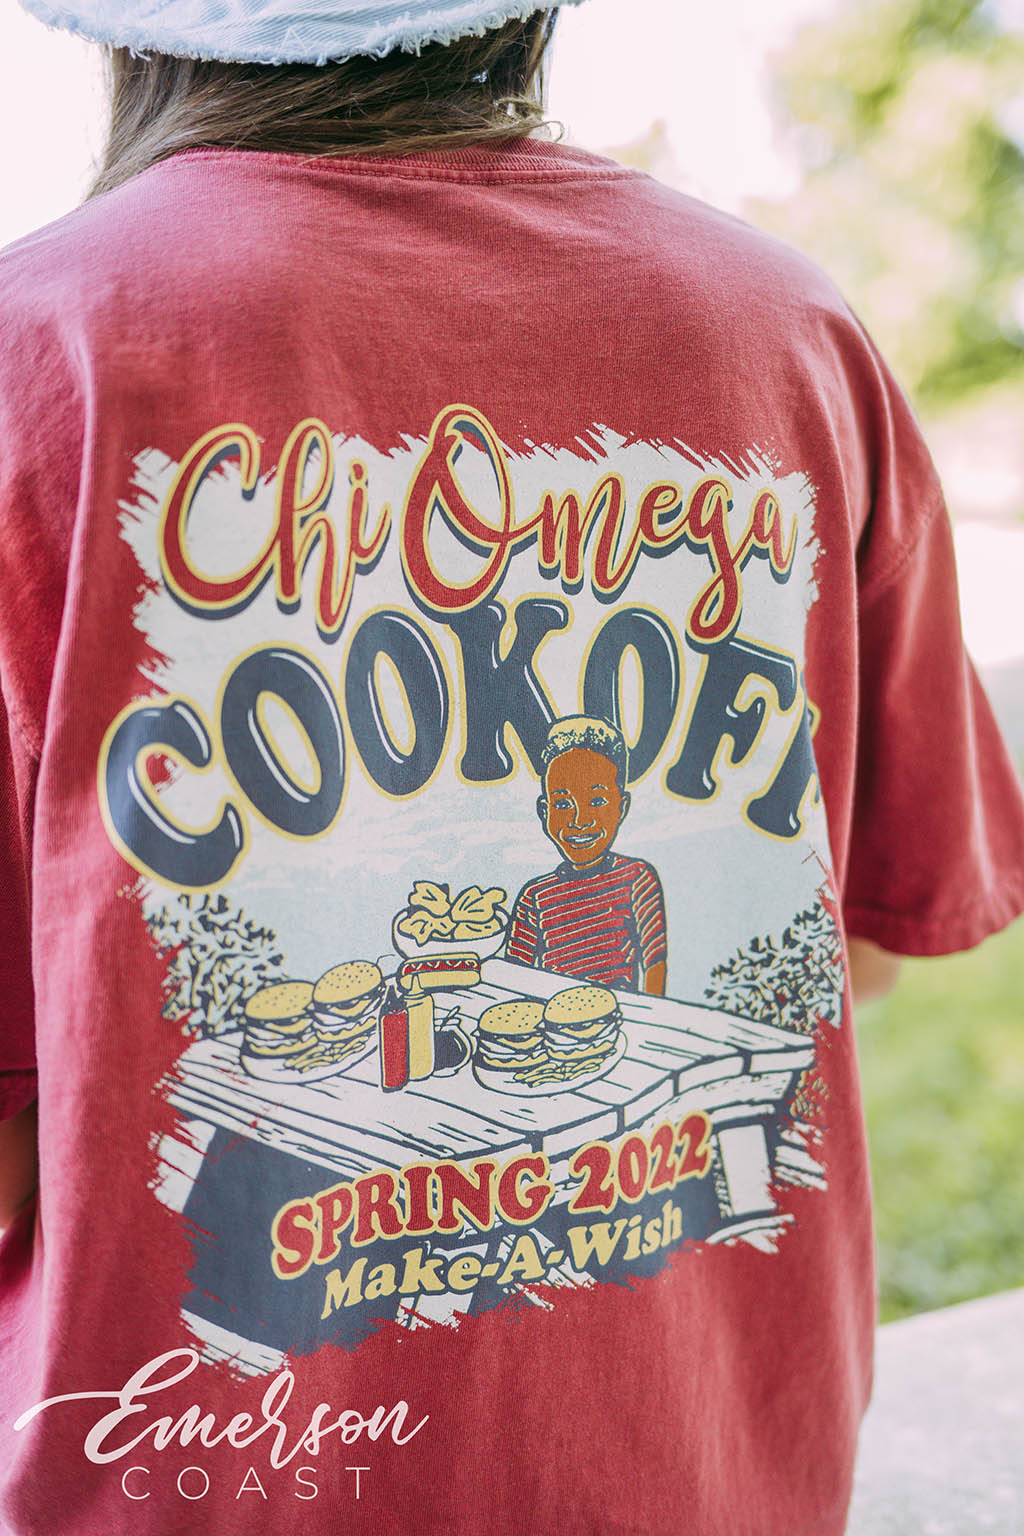 Chi Omega Philanthropy Cookoff Tee